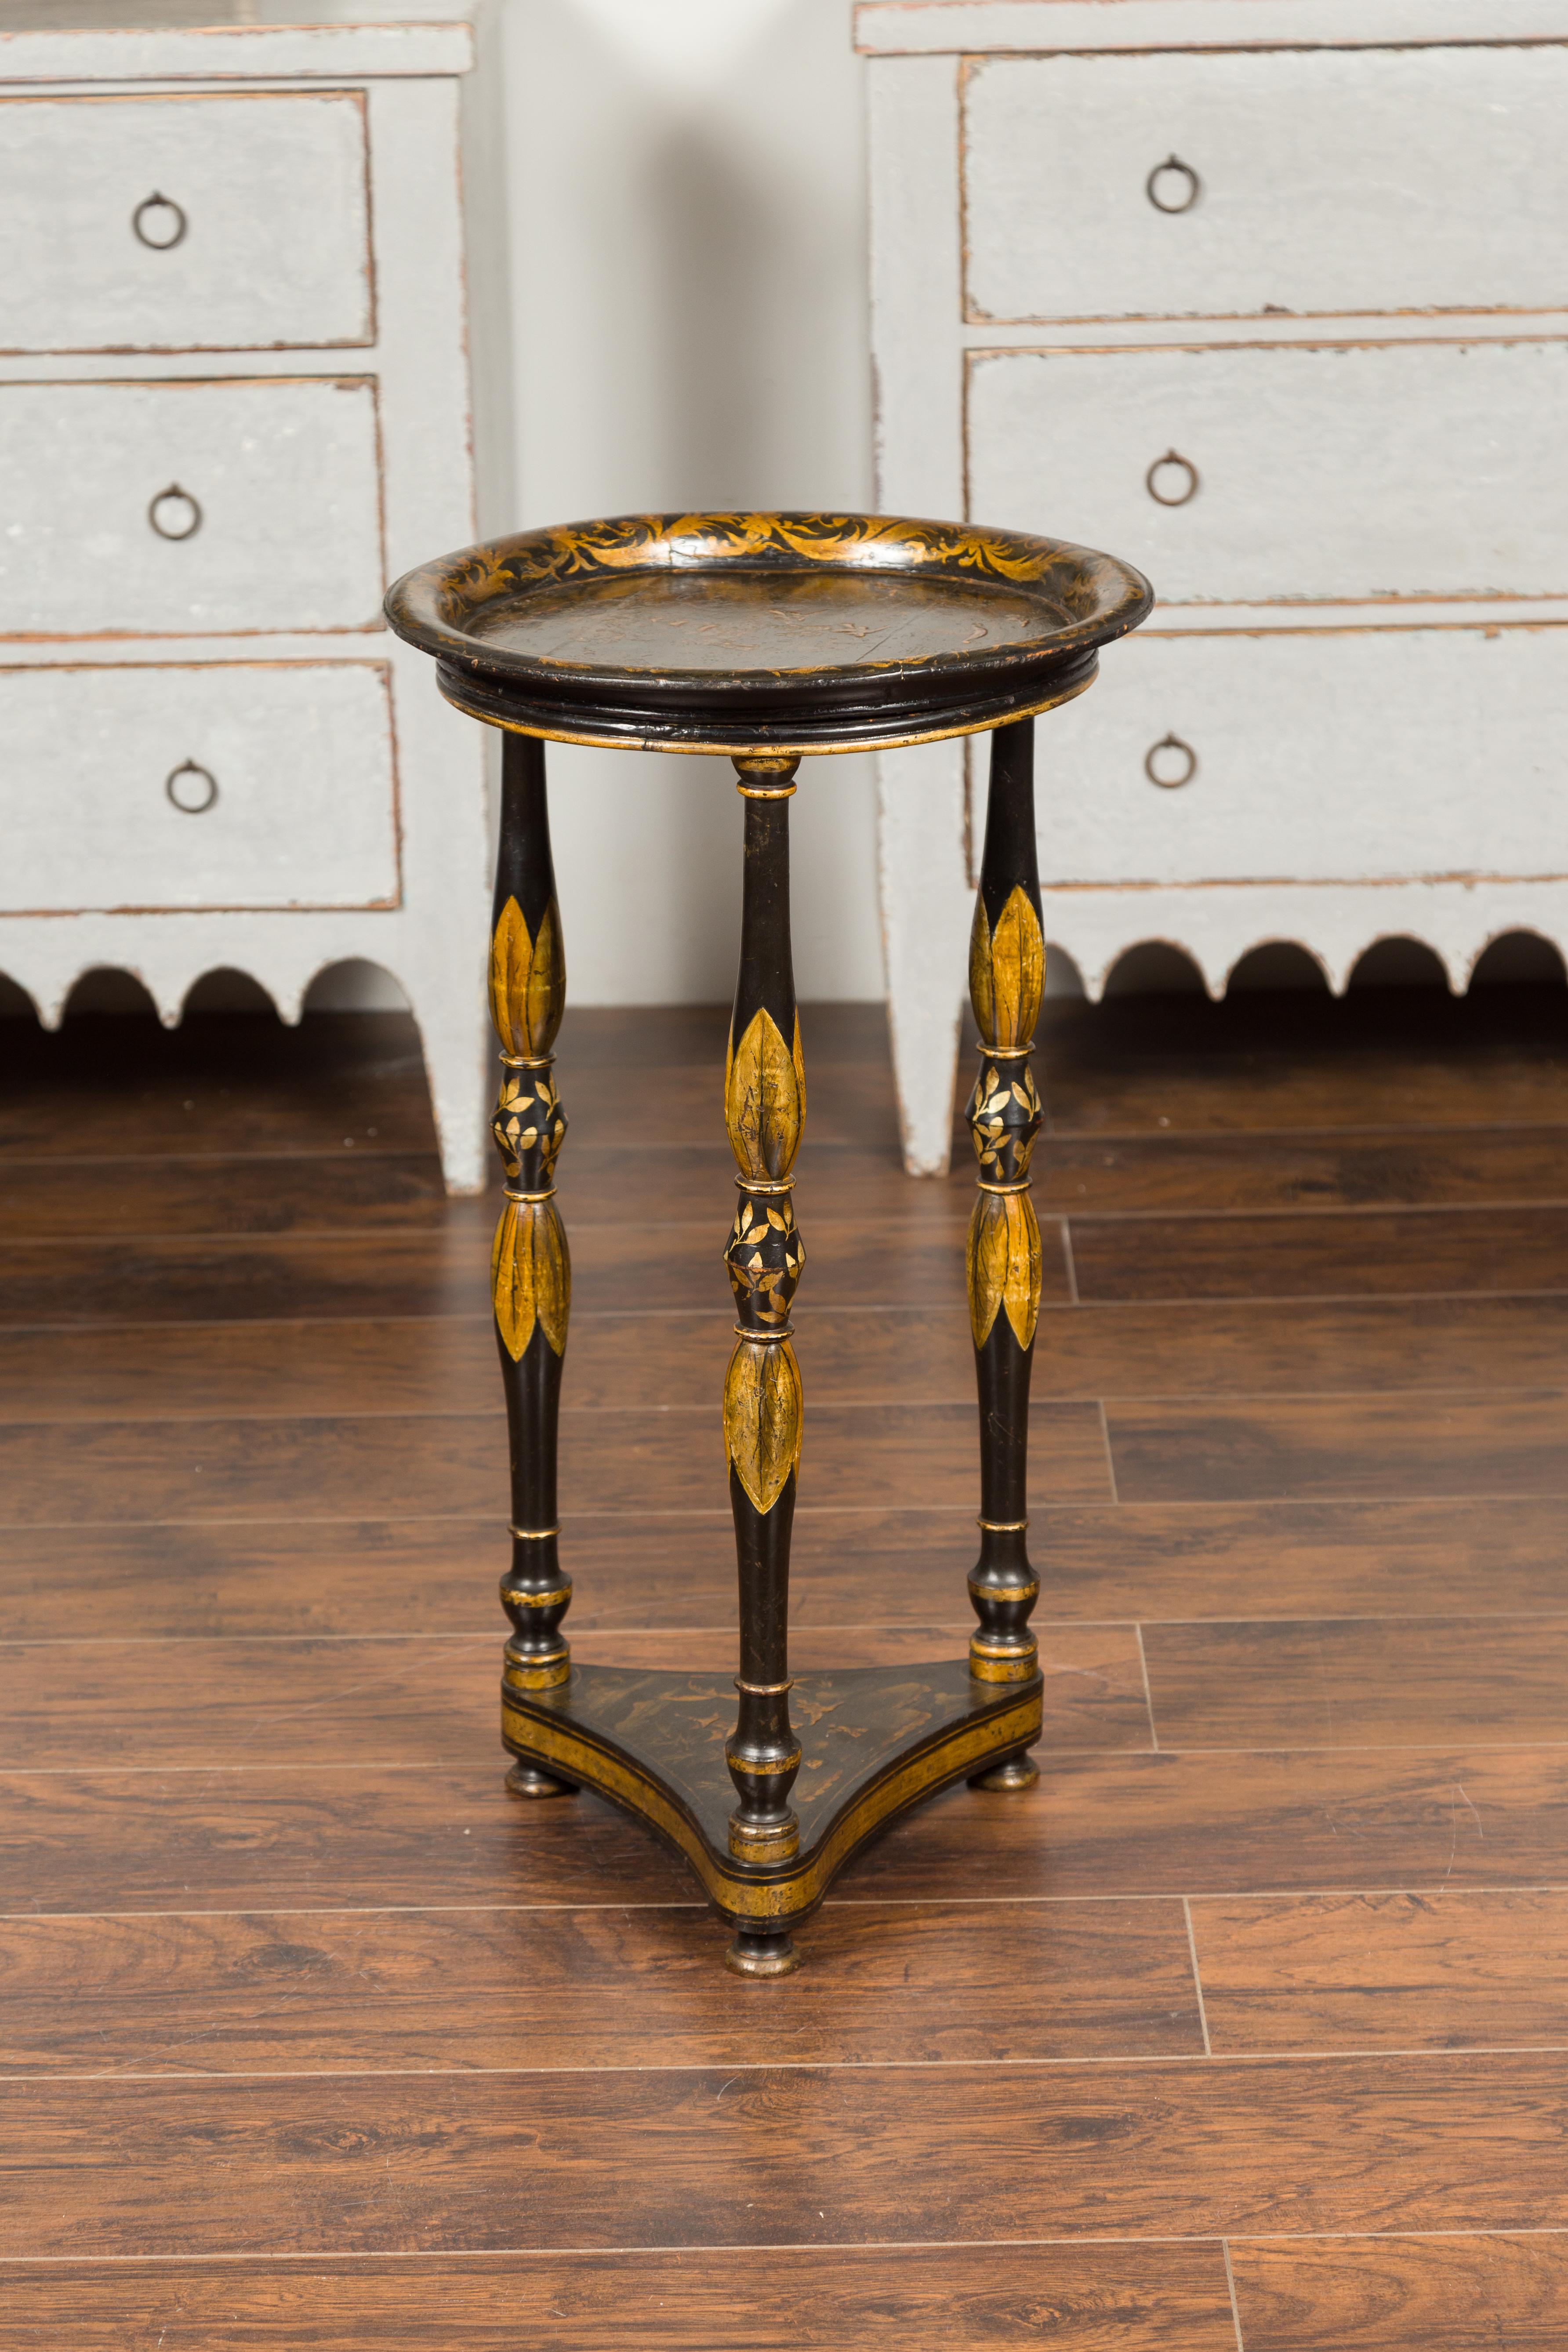 English 1850s Black Chinoiserie Guéridon Table with Gilt Motifs and Turned Legs For Sale 6